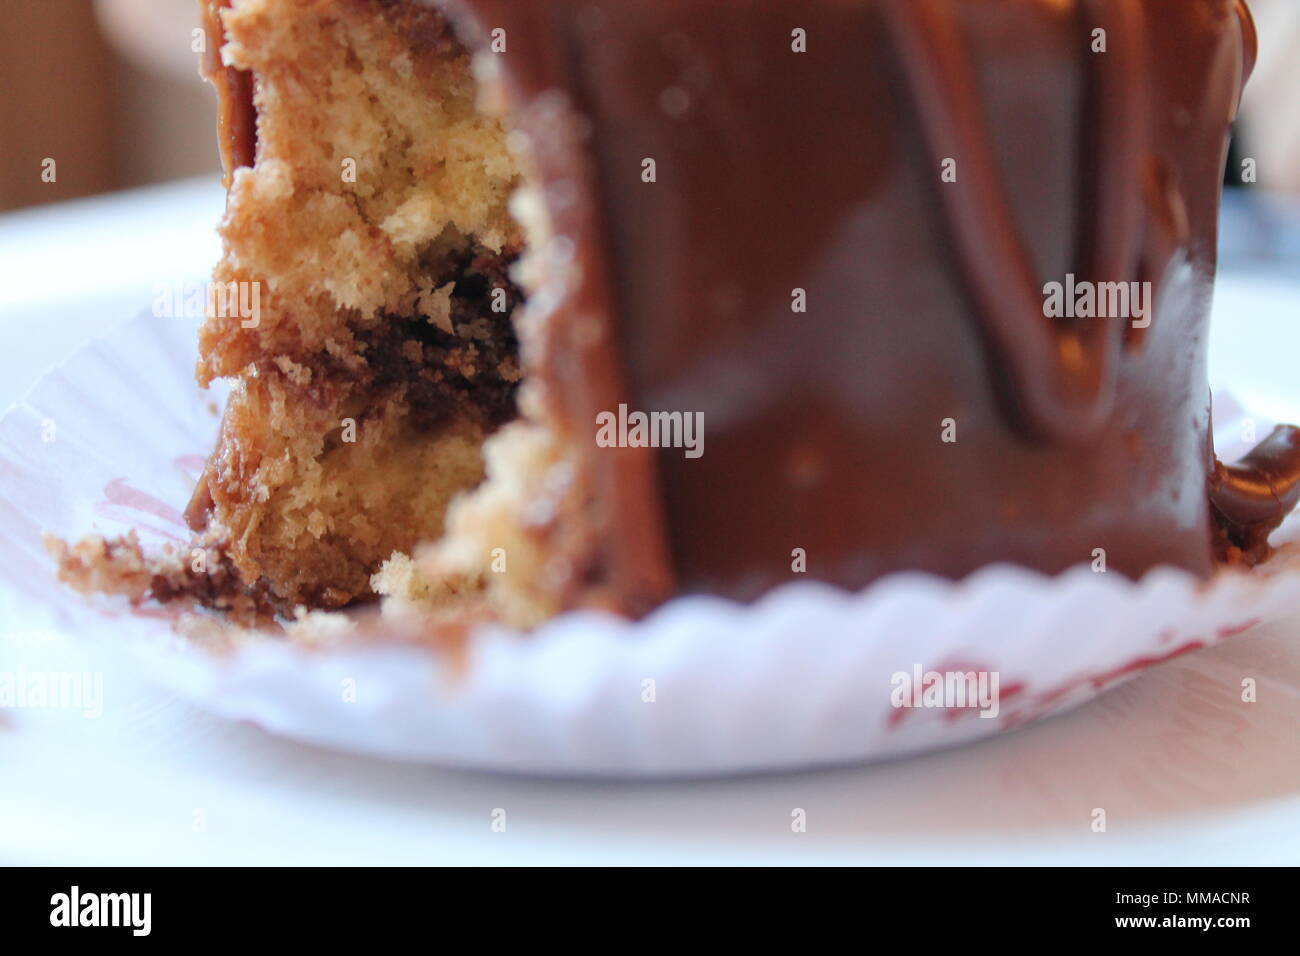 Shortbread cake with chocolate Stock Photo